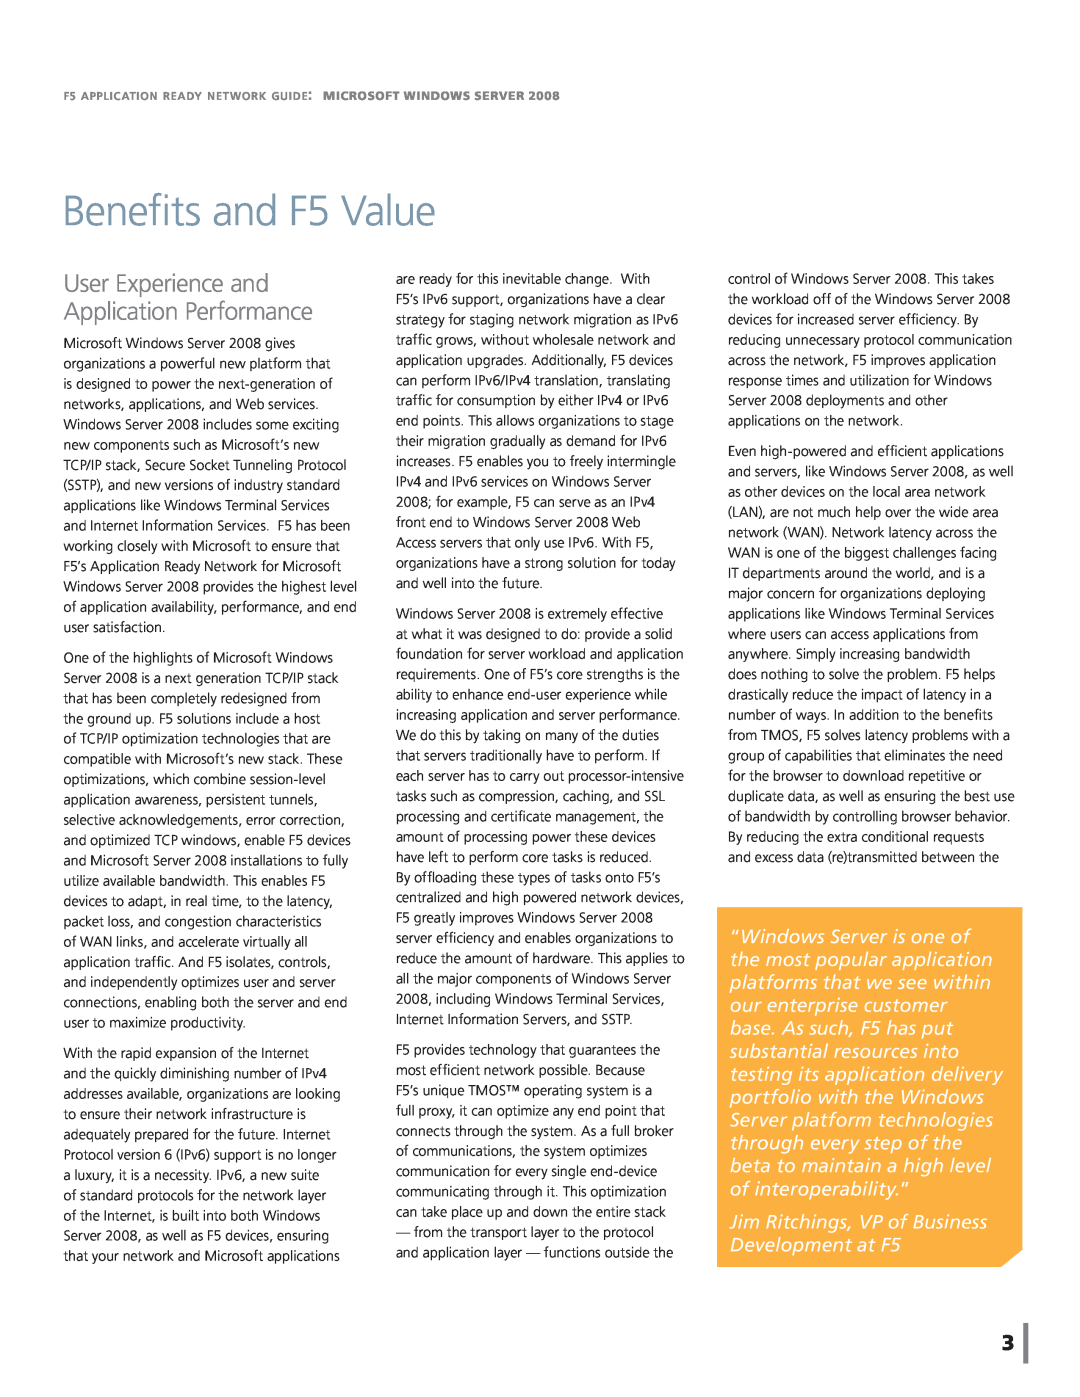 Microsoft C9C00500, R1802907, P7204473, R1802926, P7305128 Beneﬁts and F5 Value, User Experience and Application Performance 